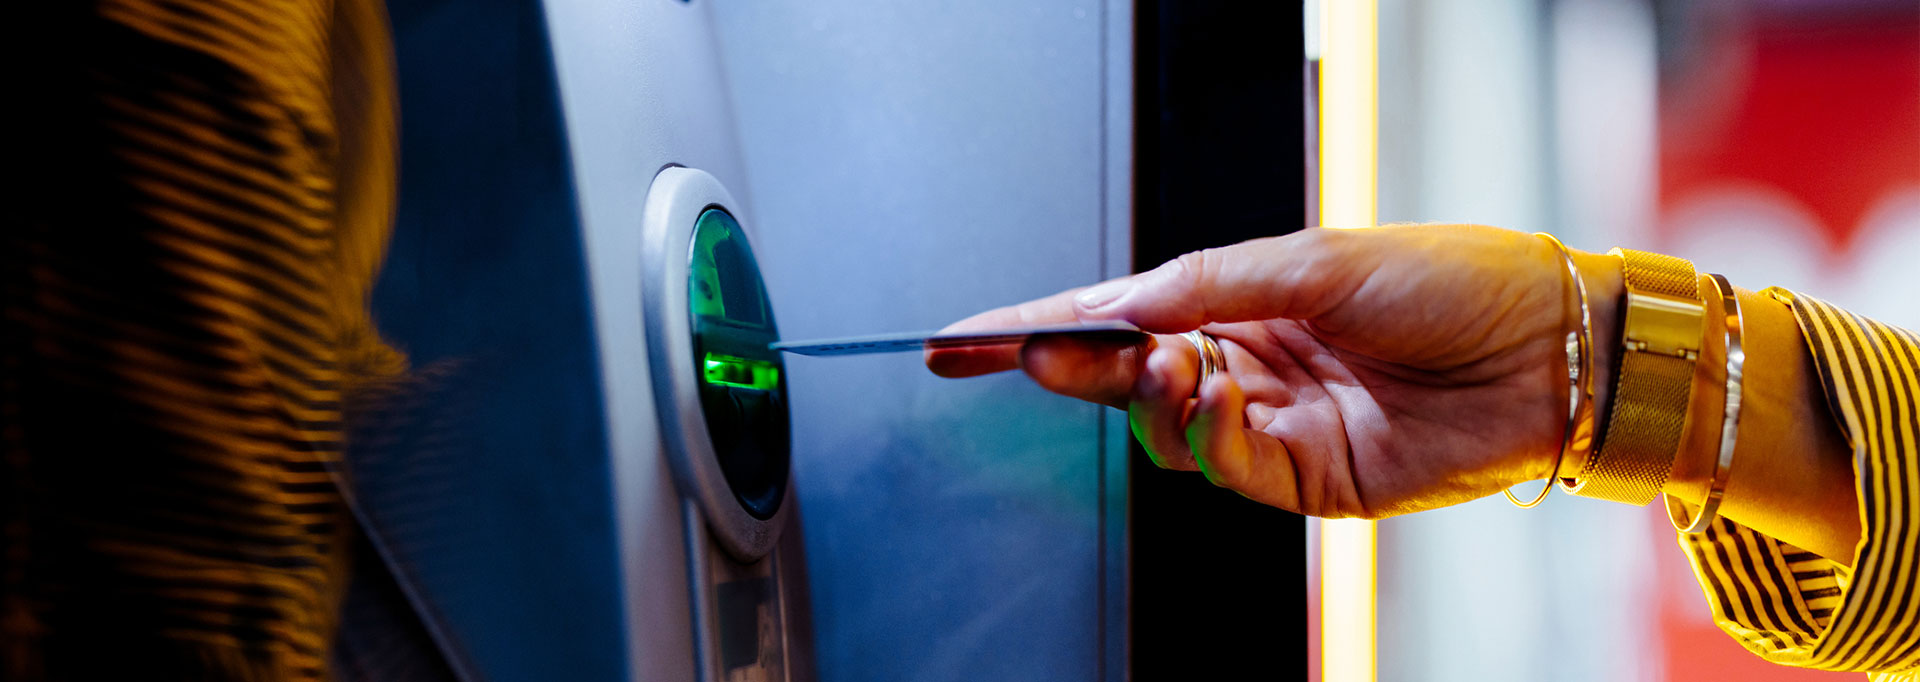 hand inserting card into atm